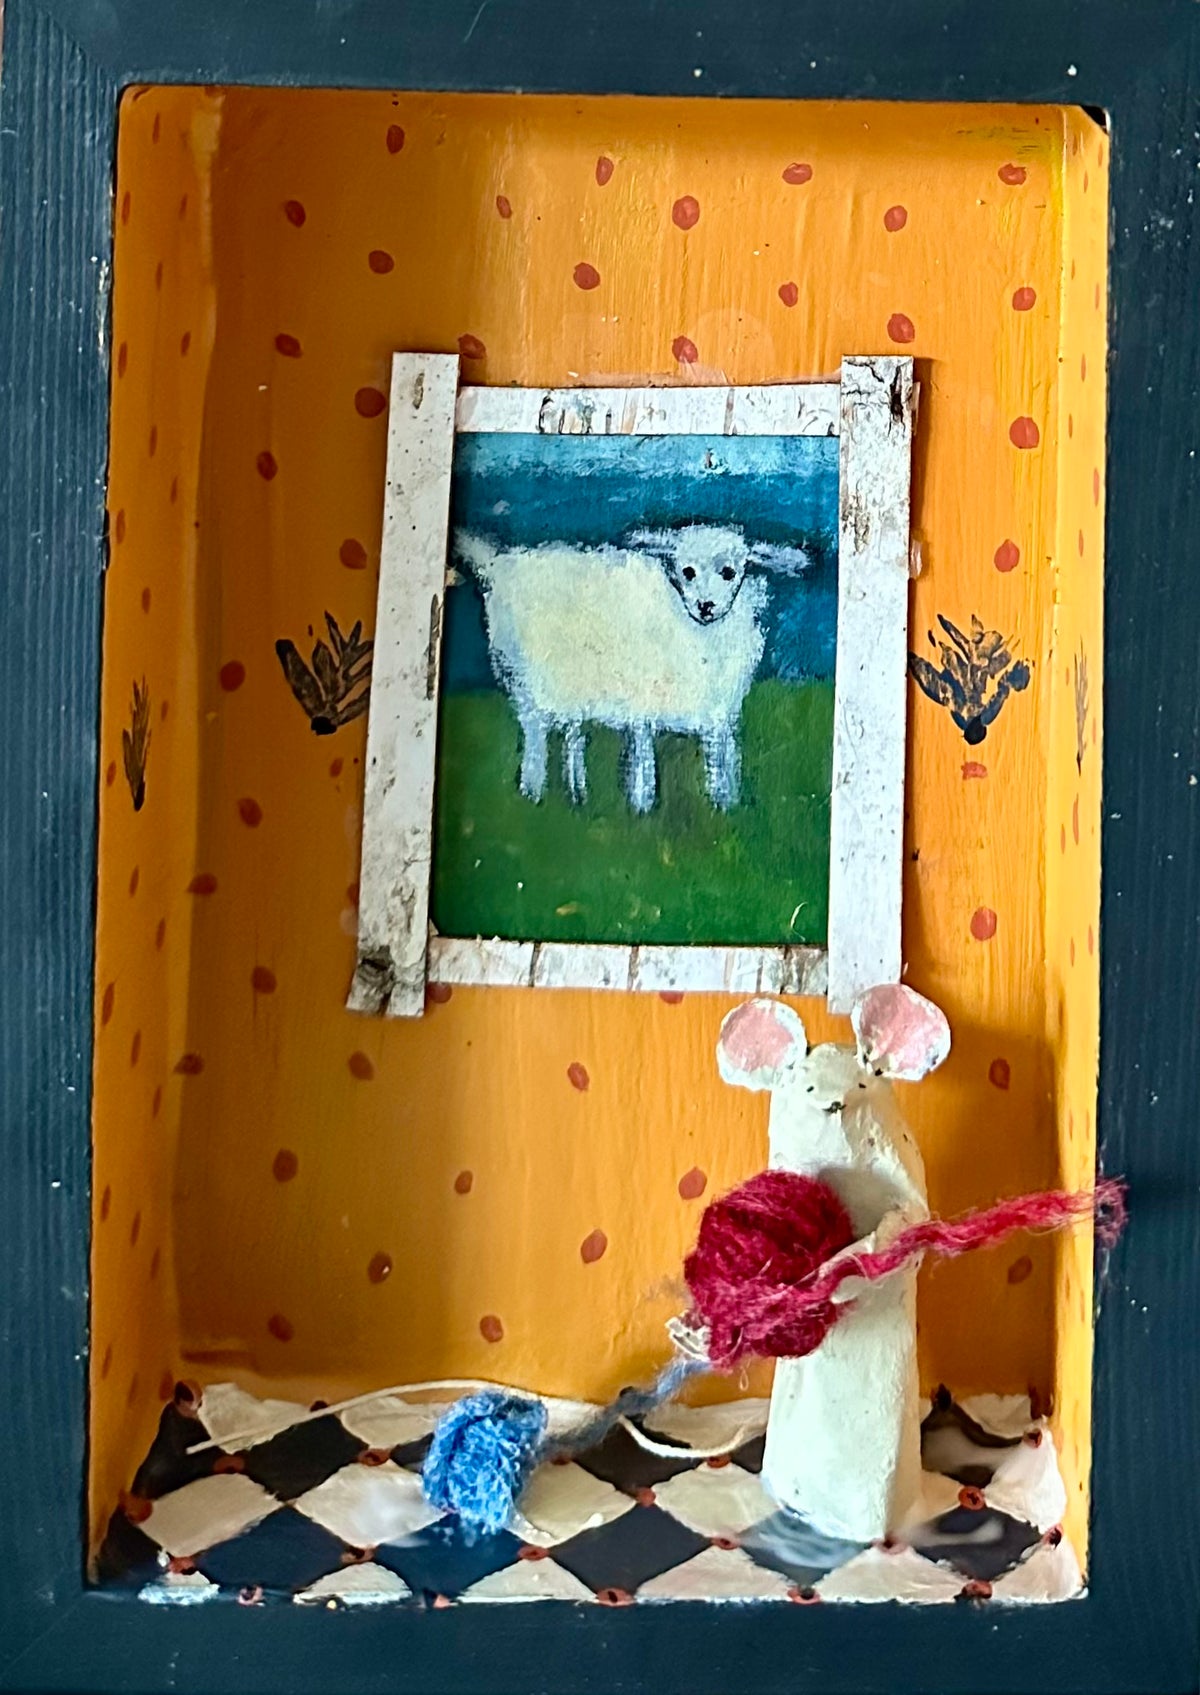 Orange Stenciled Room with Painting of White Ewe